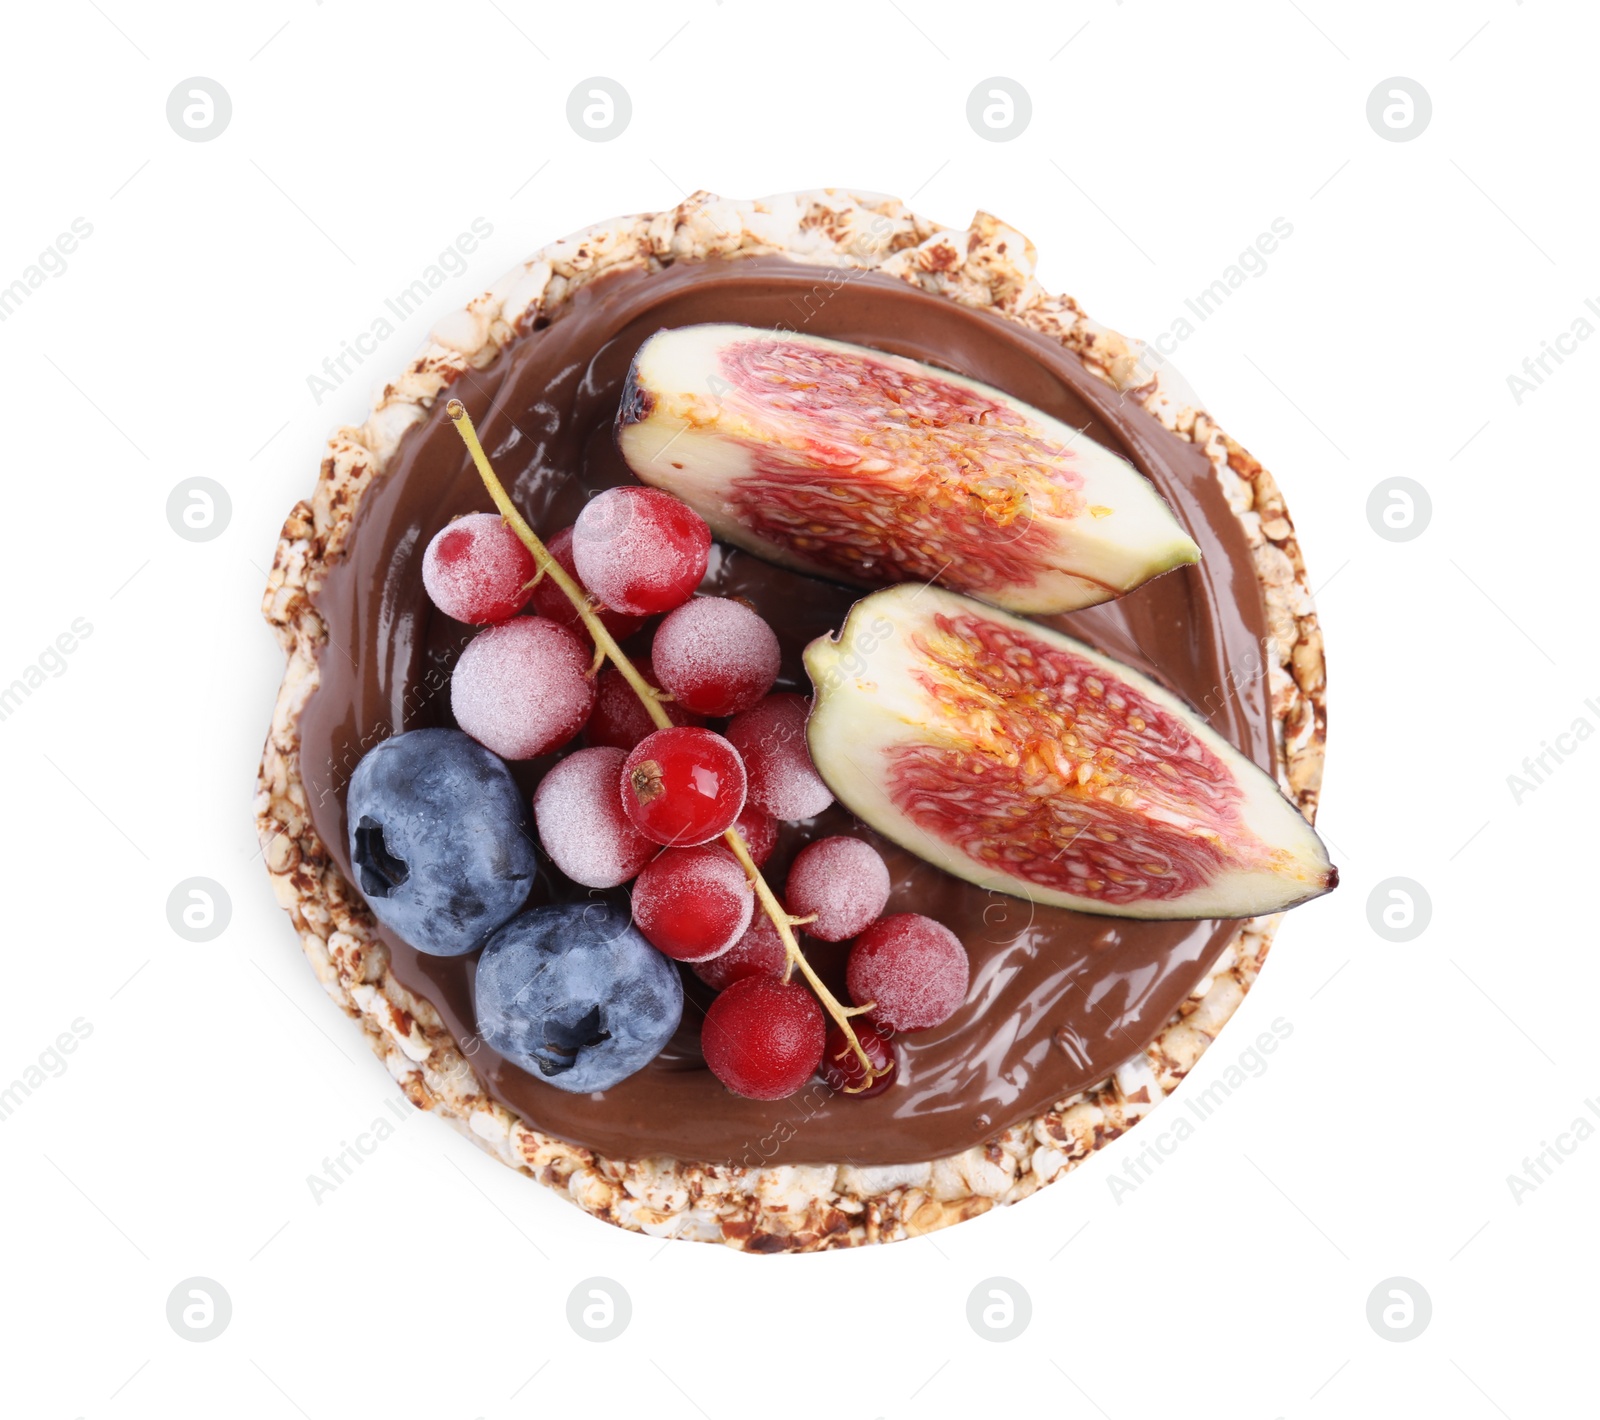 Photo of Tasty crispbread with chocolate, red currant, blueberries and figs on white background